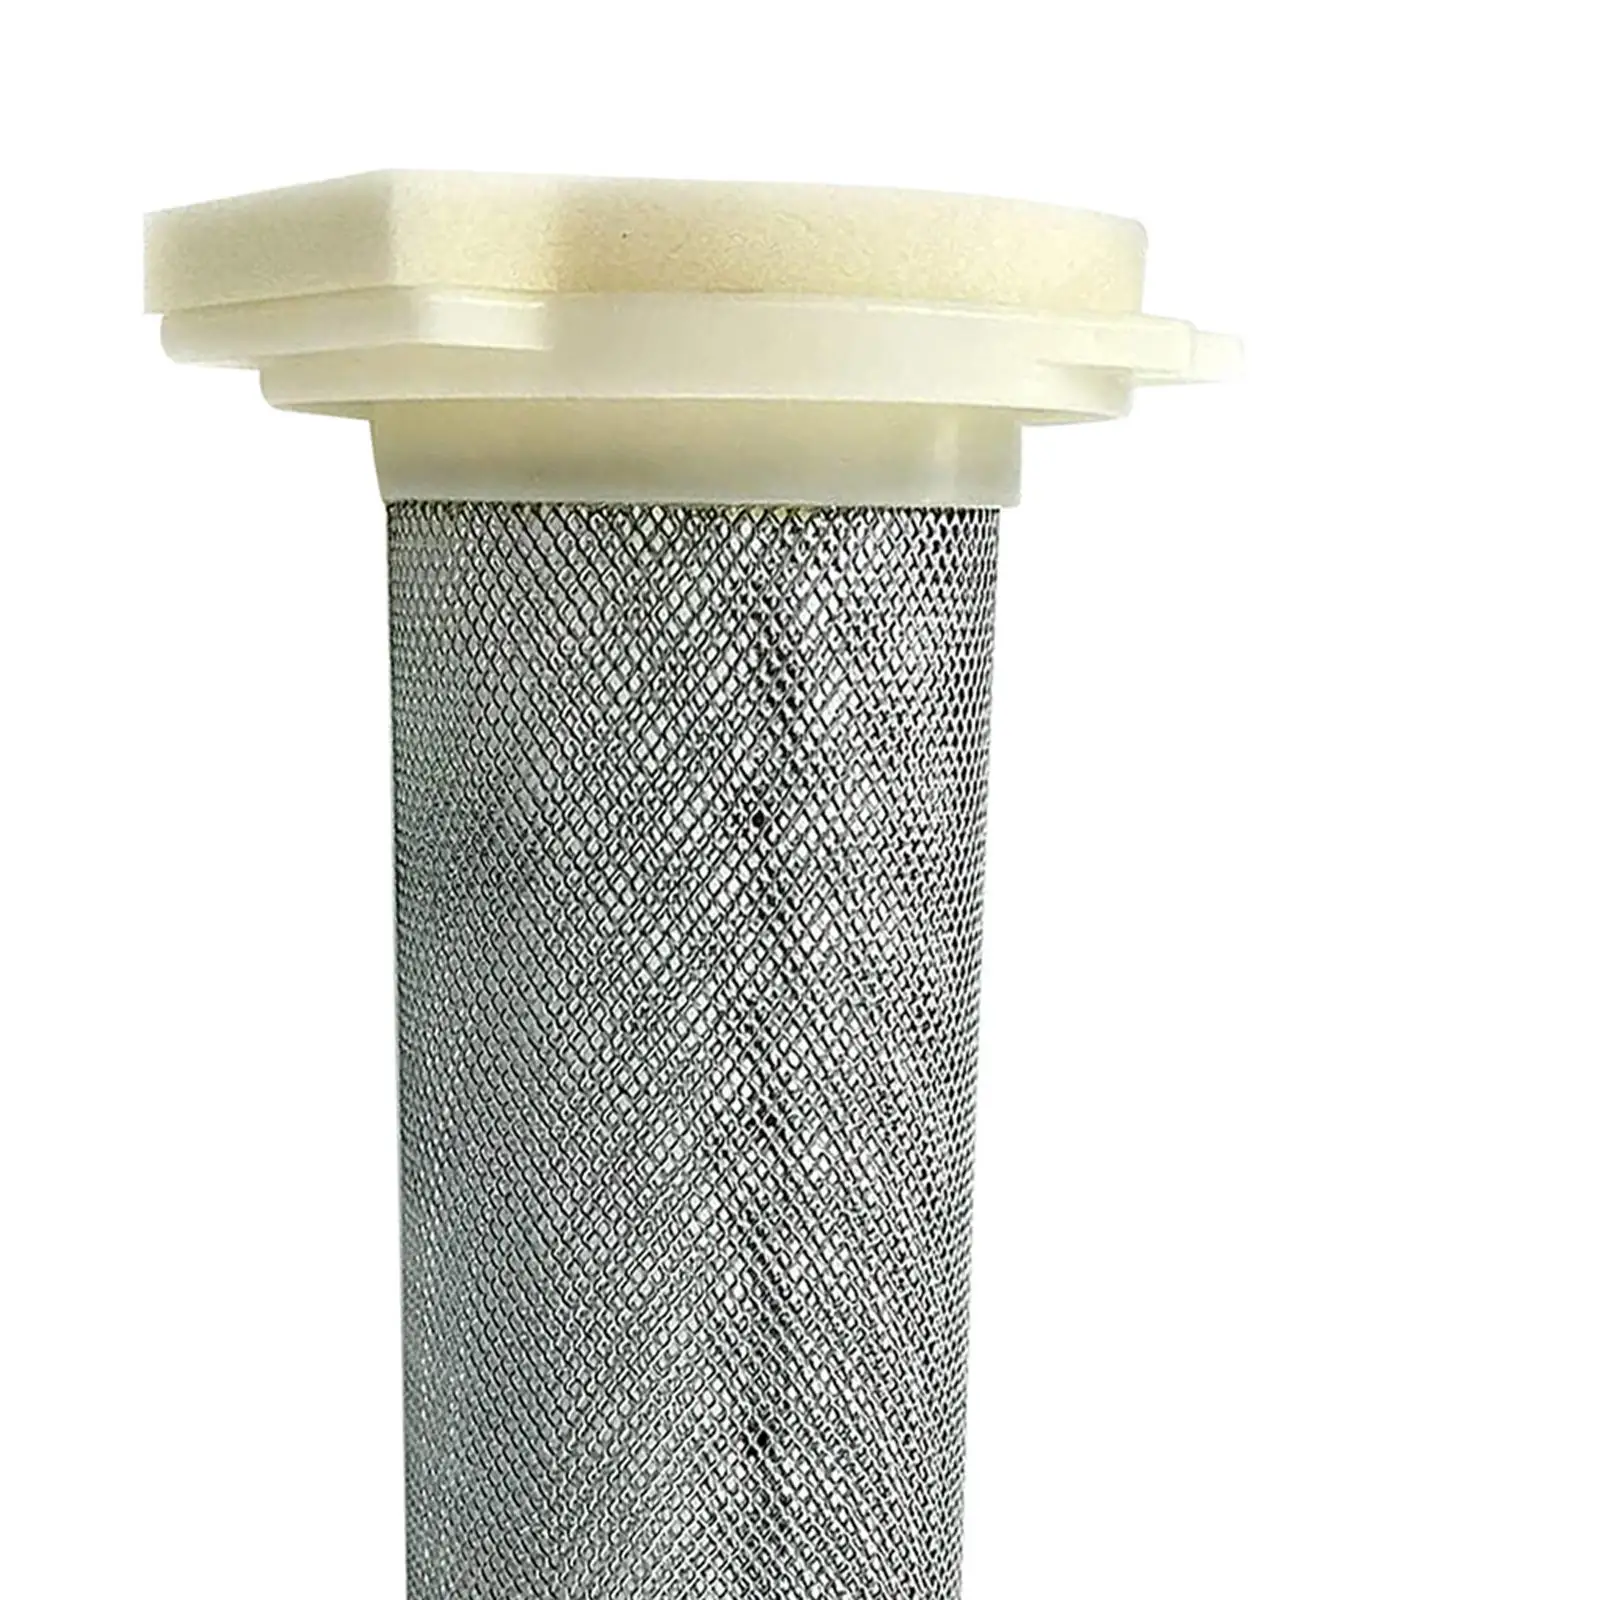 Intake Valve Air Filter Cage 1Uy-14458-01-00 for    350 Replaces